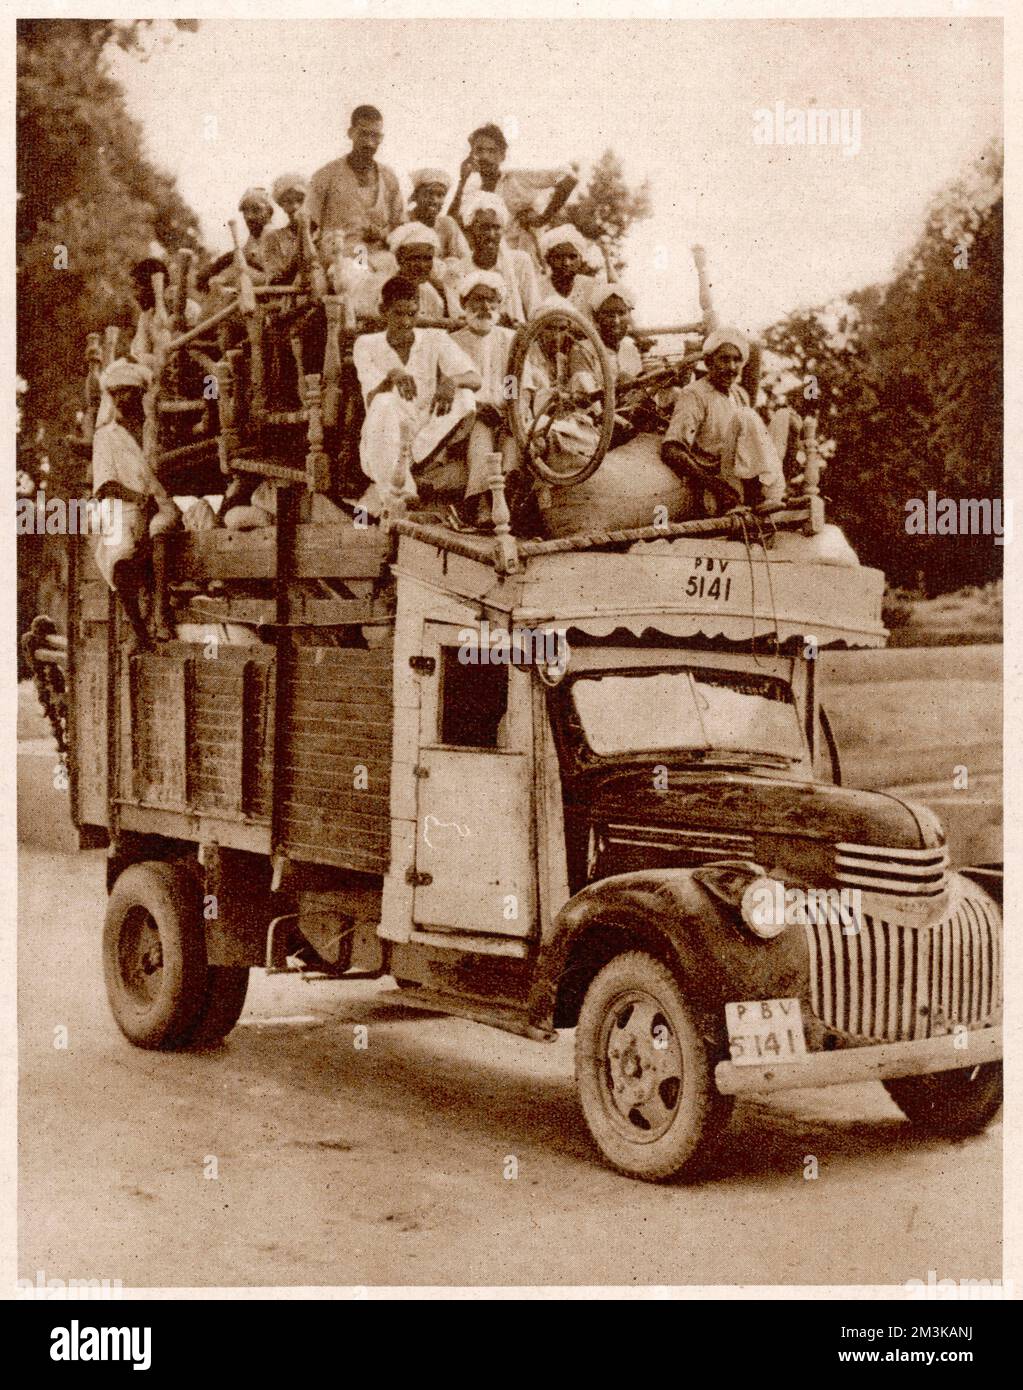 A lorryload of Sikh and Hindu refugees about to cross the Wagah Bridge between Pakistan and India to escape the mass killings and atrocities between Muslims, Sikhs and Hindus following Partition in 1947.  1947 Stock Photo